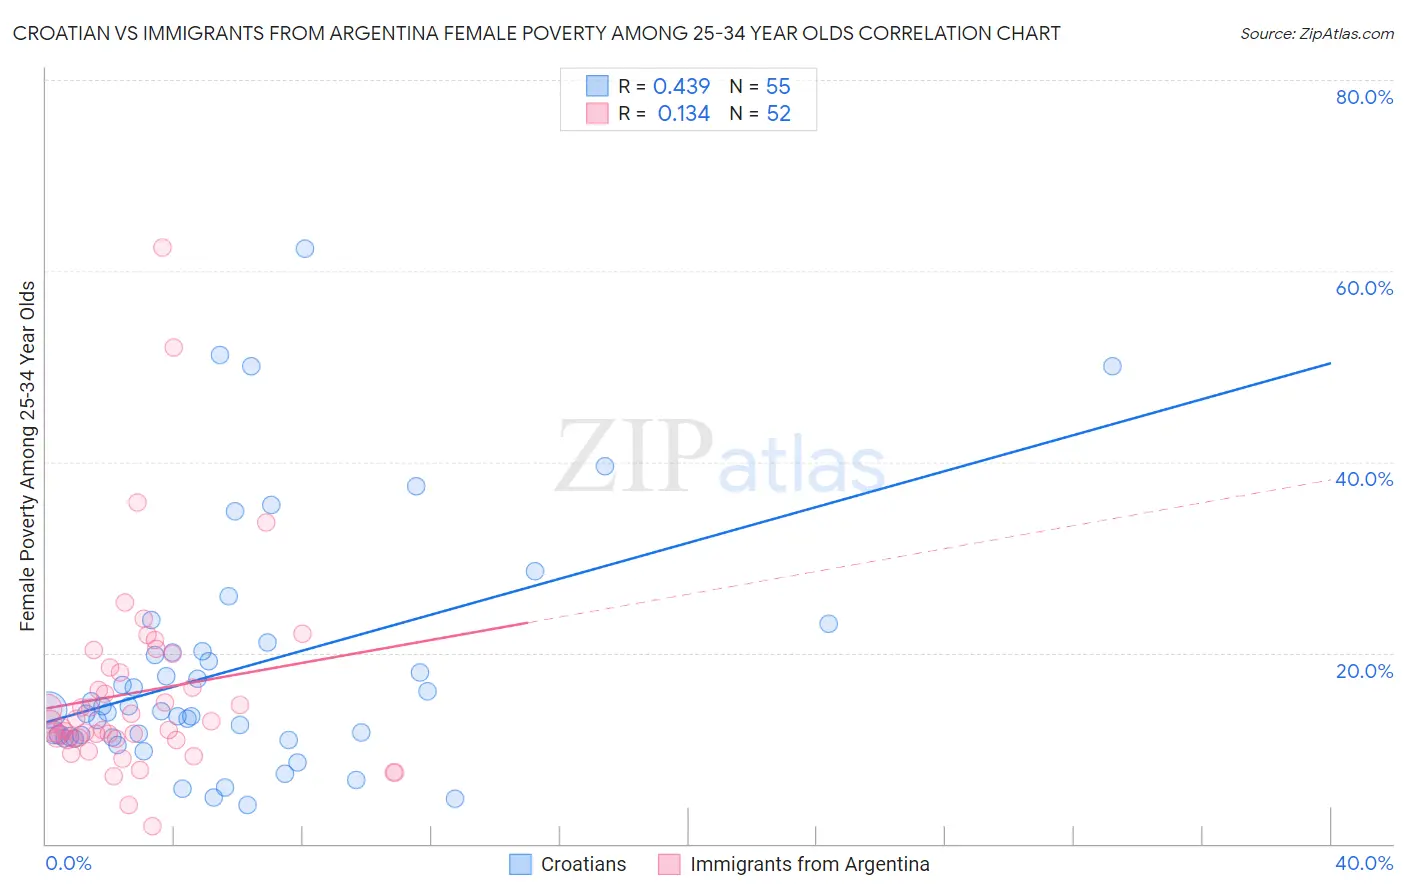 Croatian vs Immigrants from Argentina Female Poverty Among 25-34 Year Olds